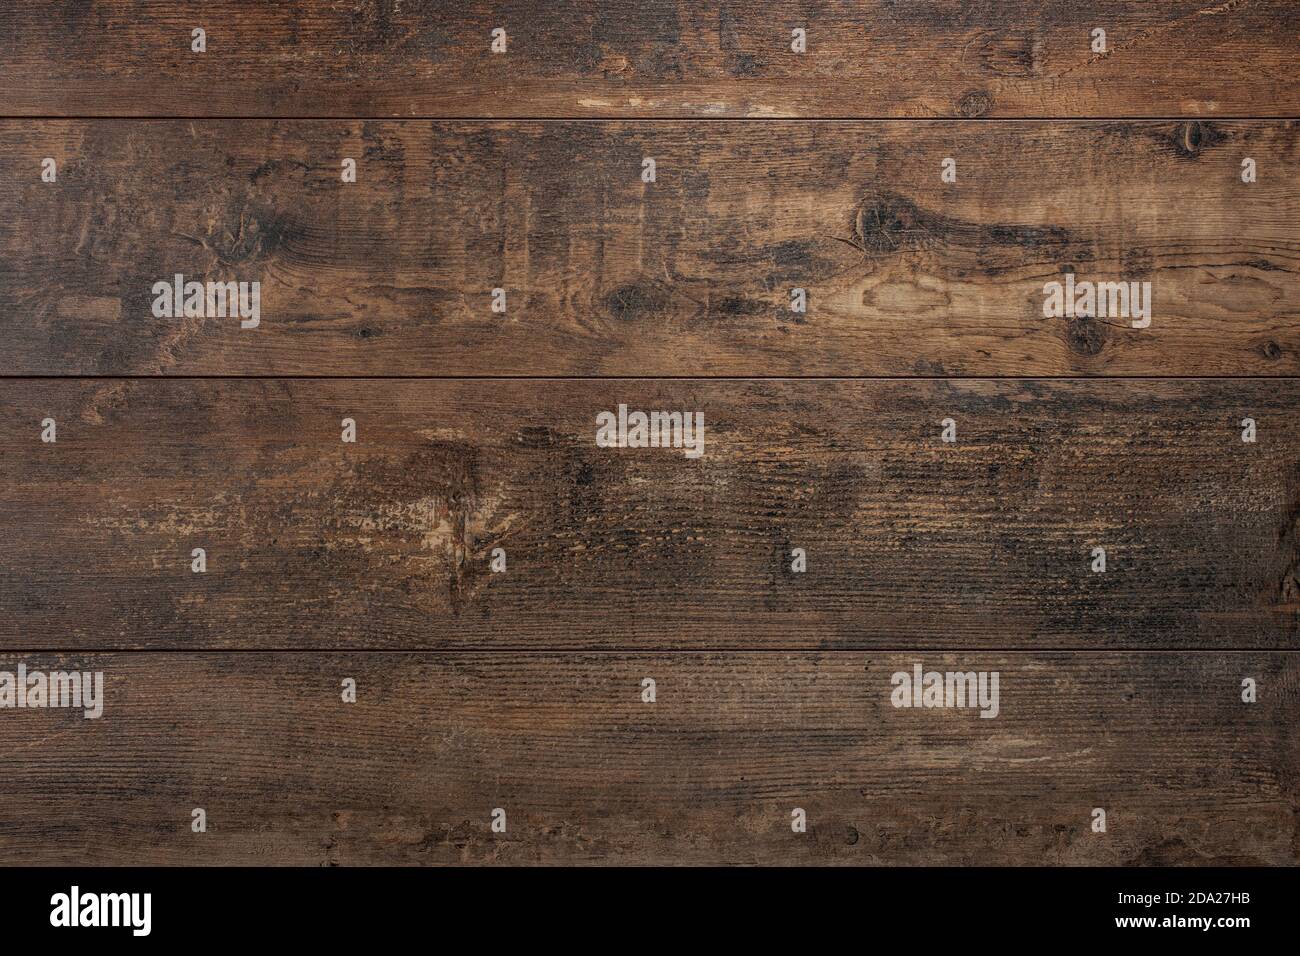 Wooden background. Texture with an old, rustic, brown planks. Old Vintage dark brown wooden table textured background Stock Photo